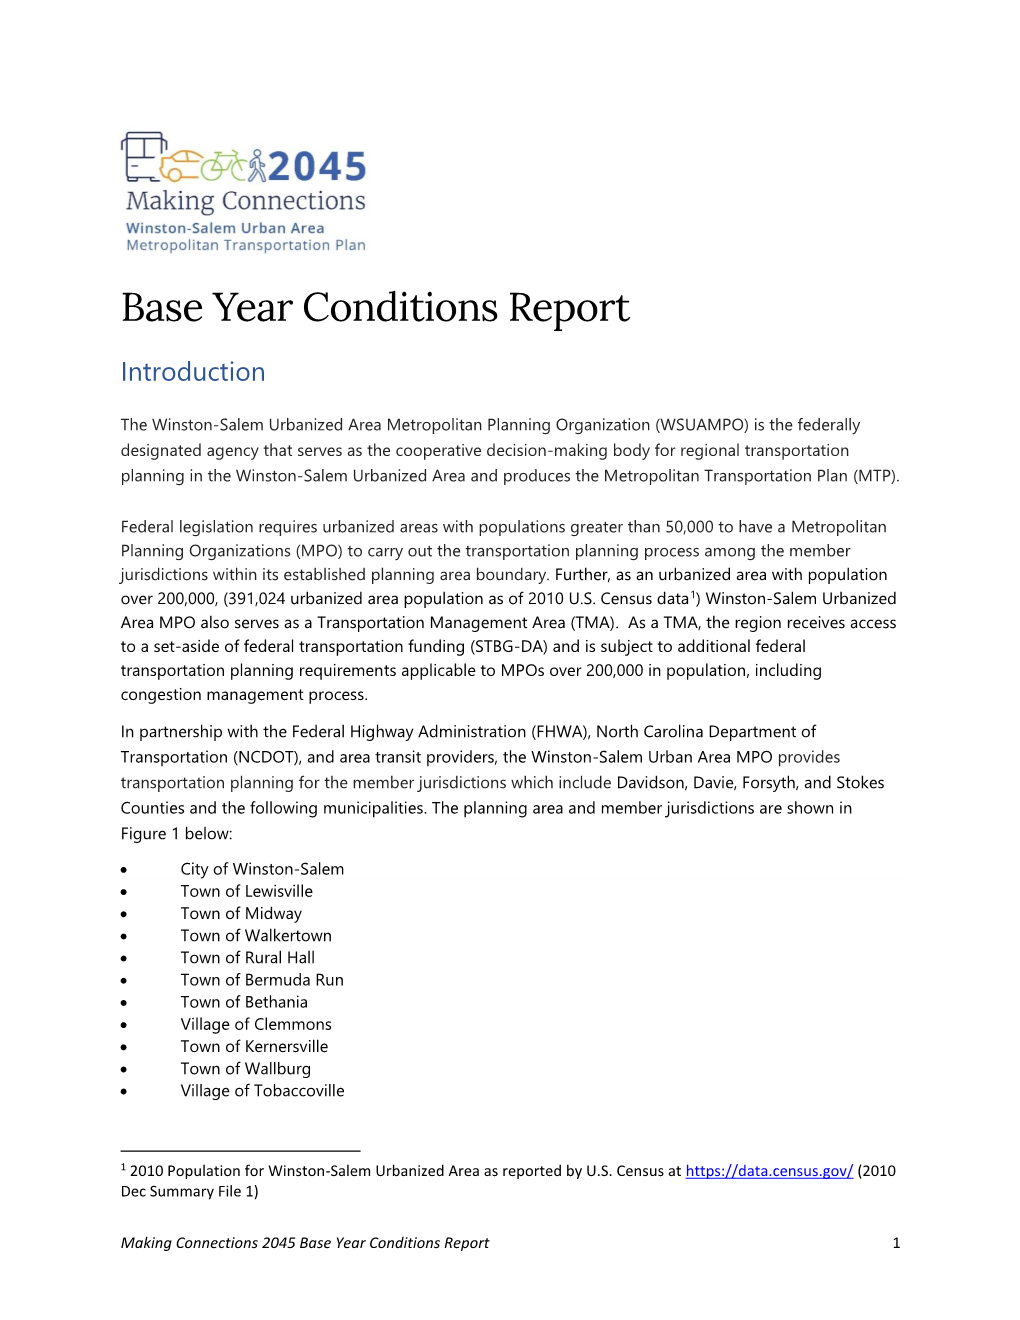 Base Year Conditions Report